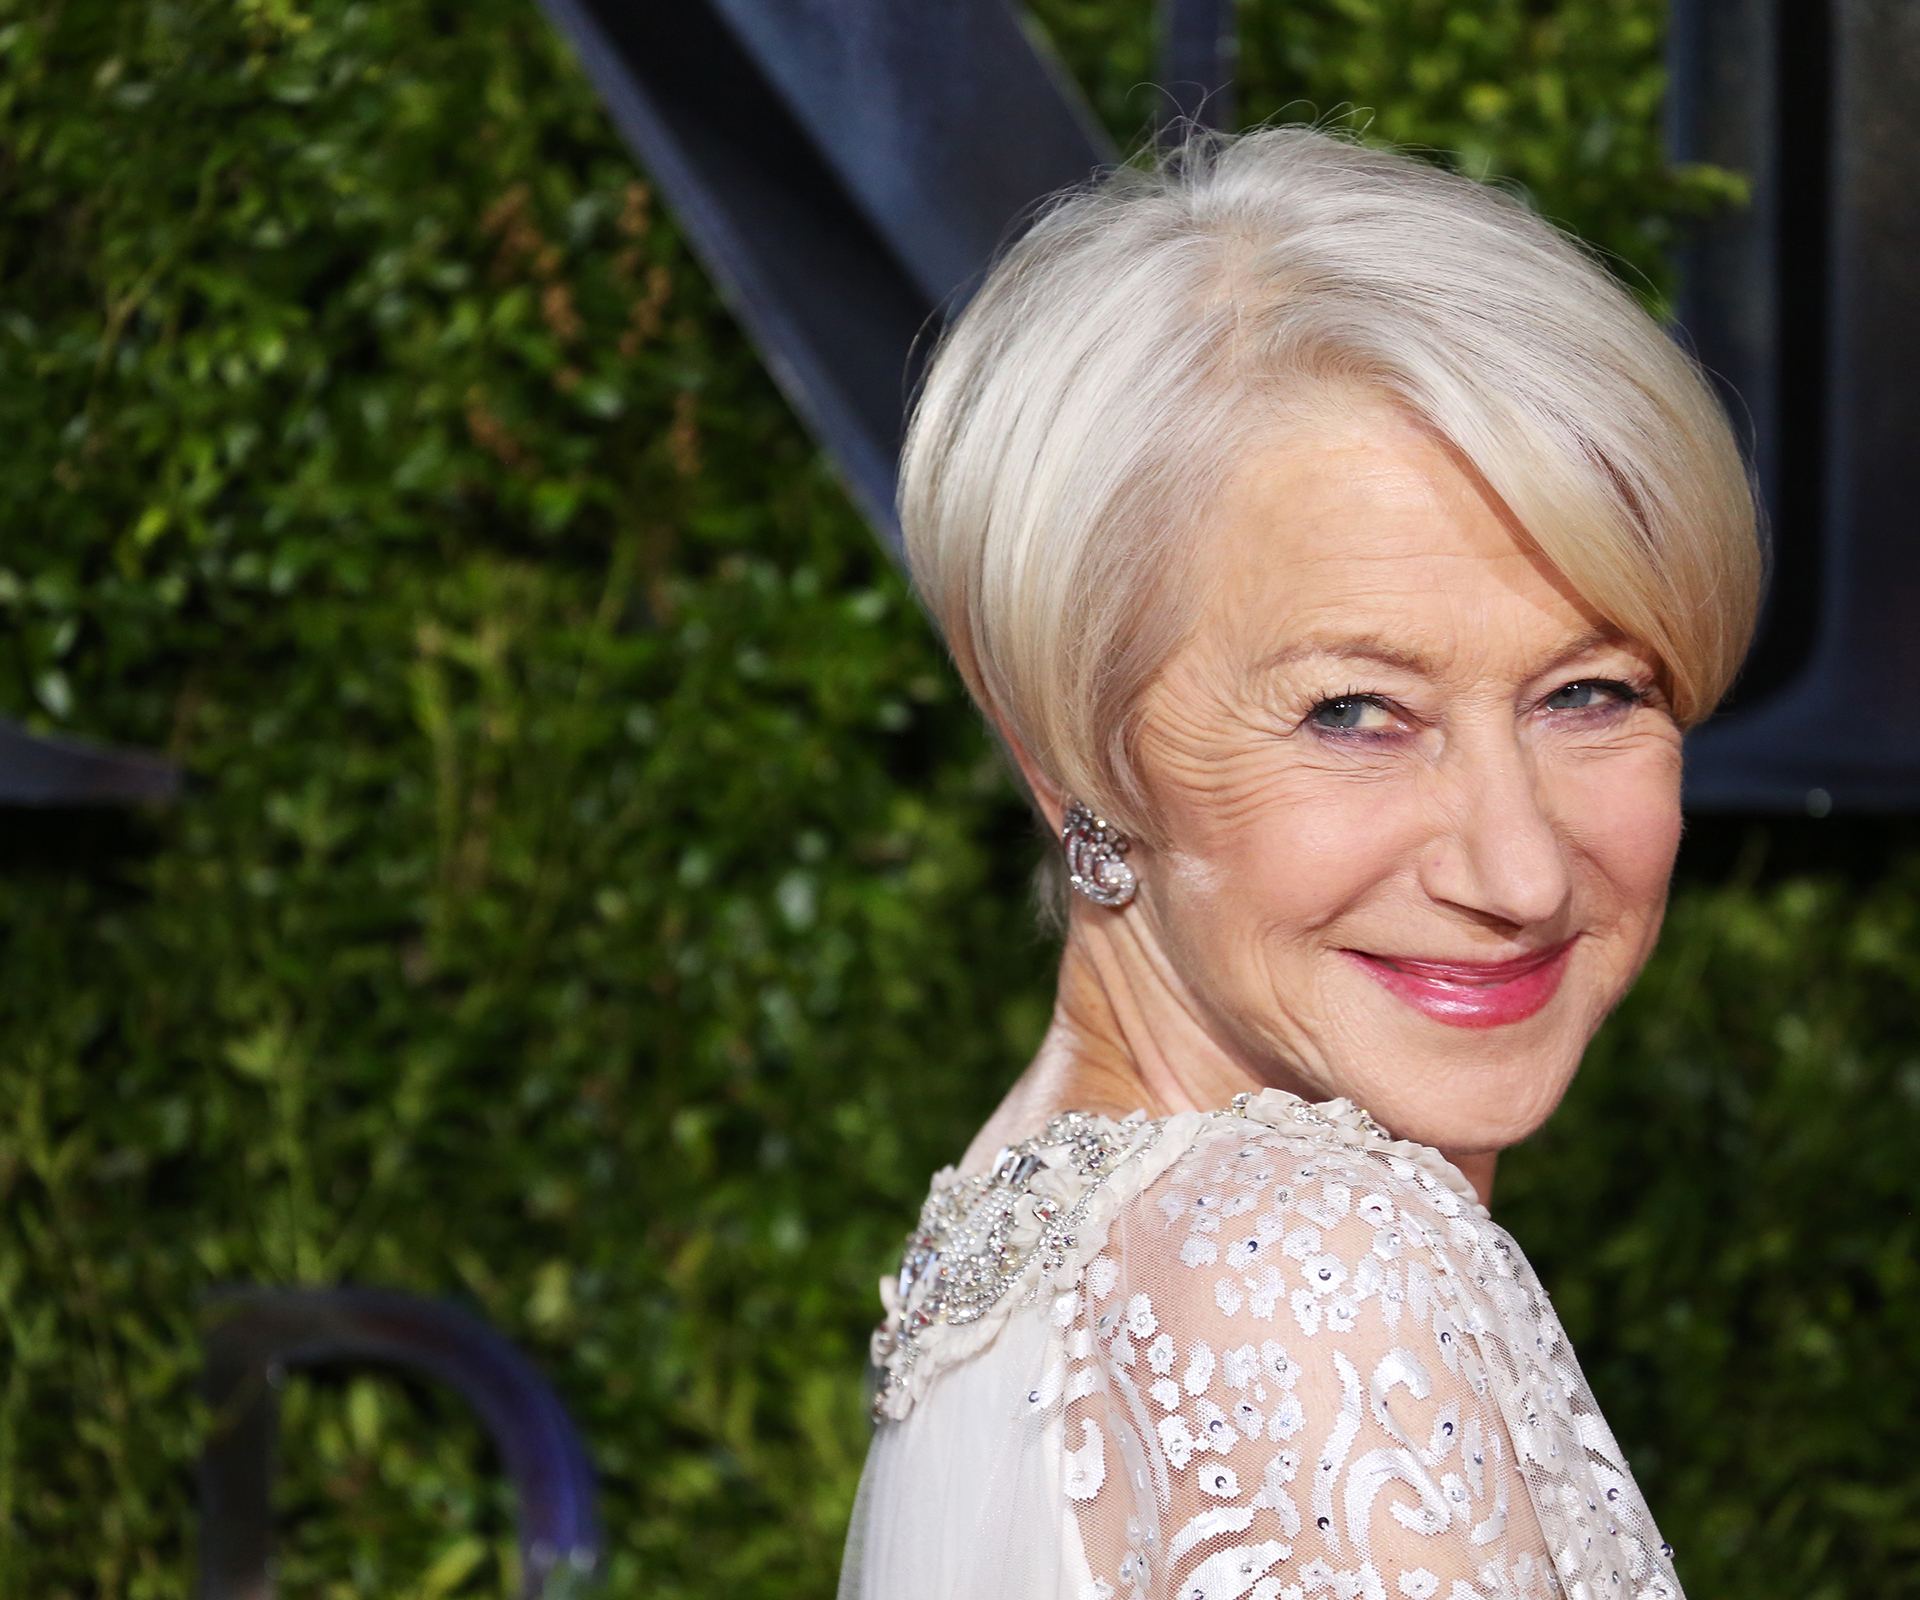 Helen Mirren calls out ageism in Hollywood: “It’s f–king outrageous”